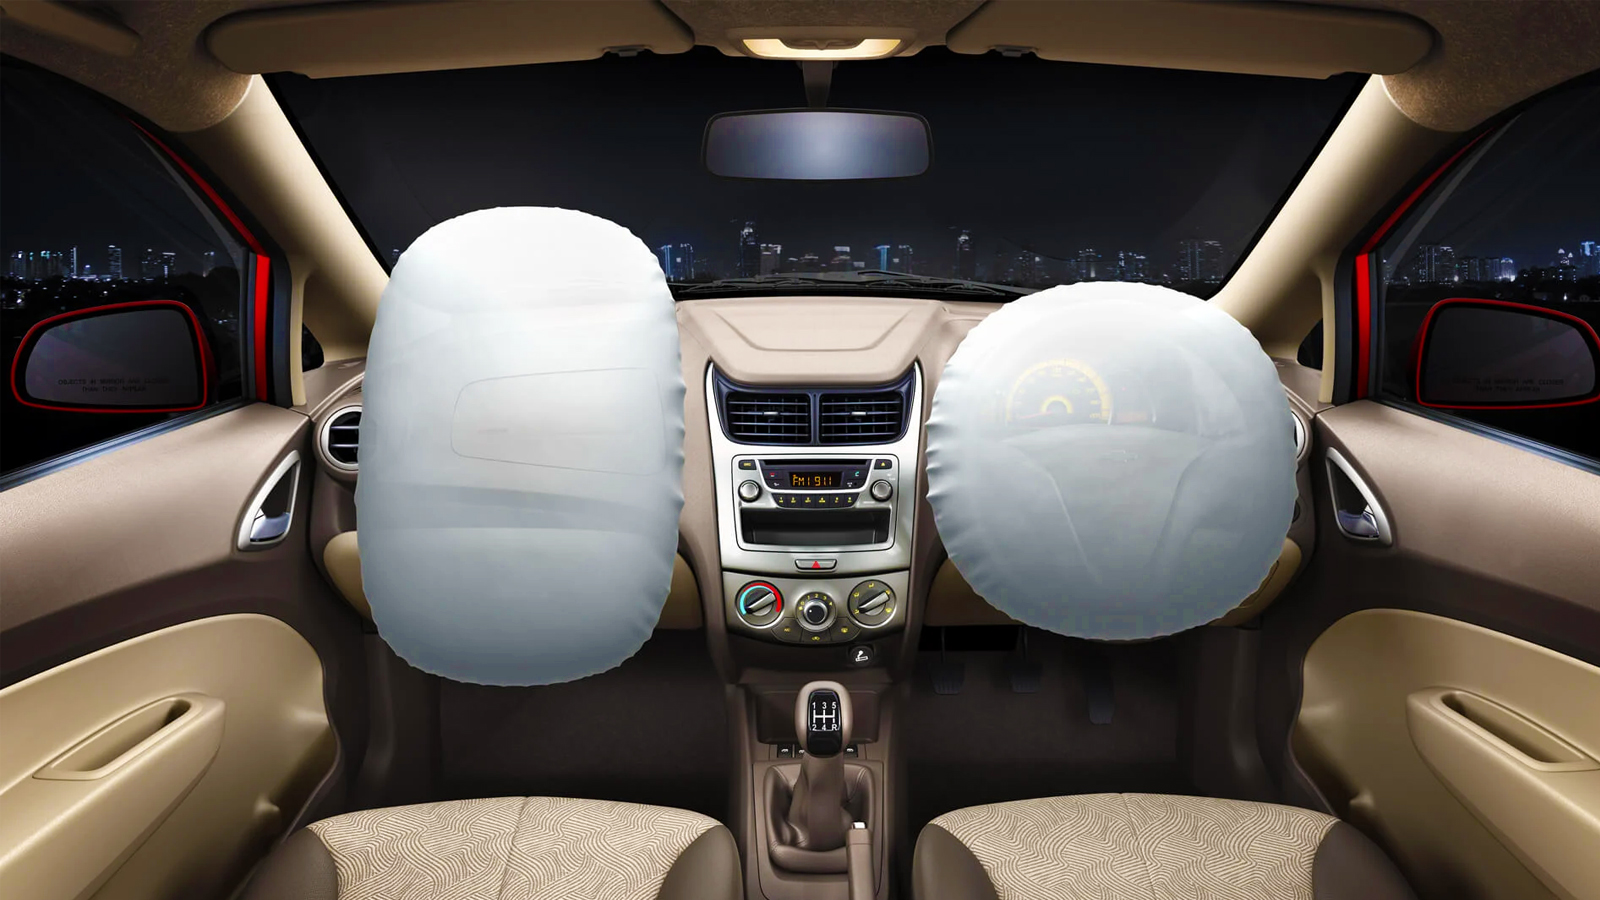 Government on Airbags